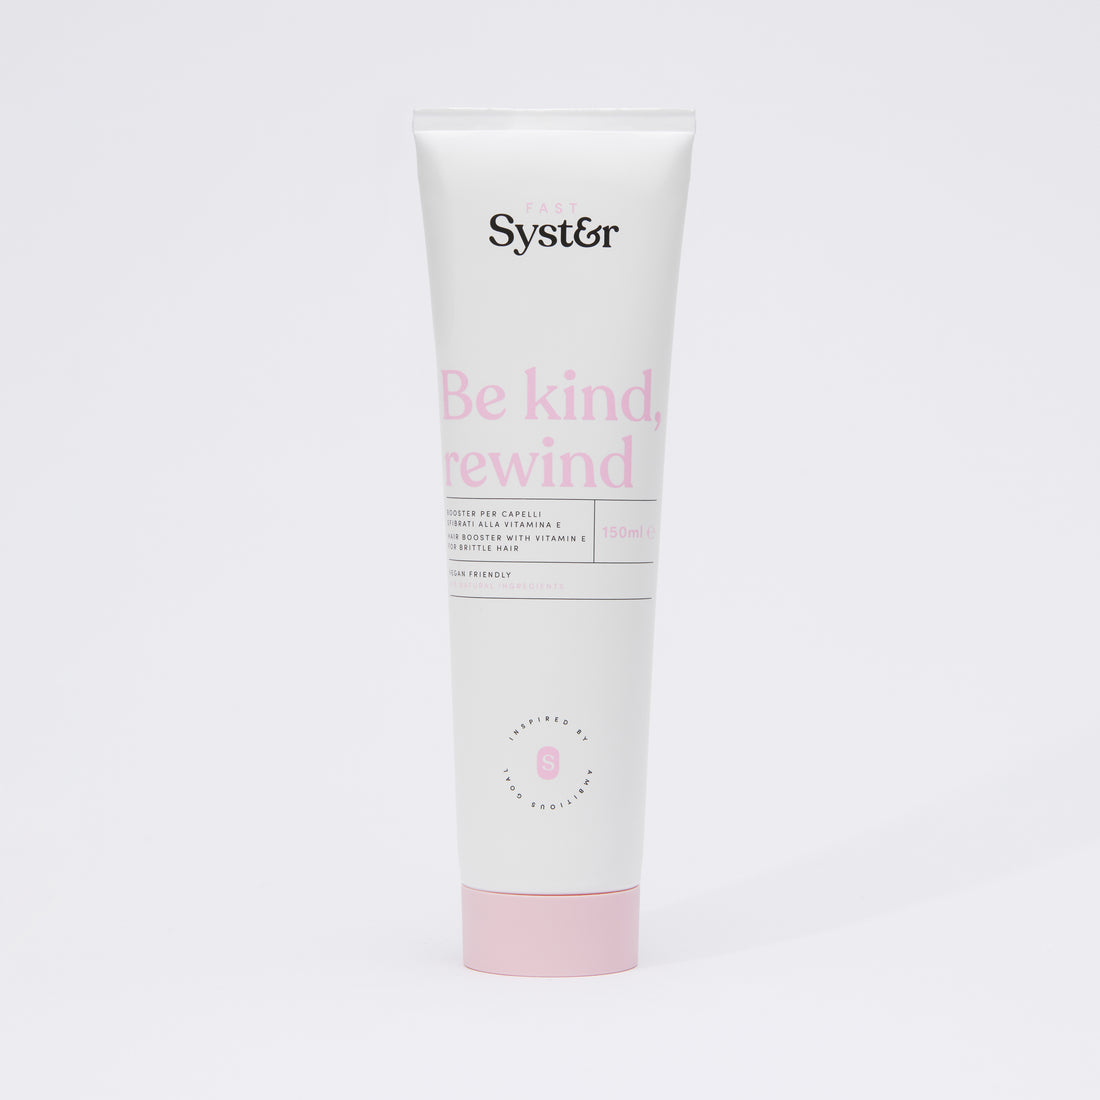 Syster be kind rewind Vitamin C hair booster